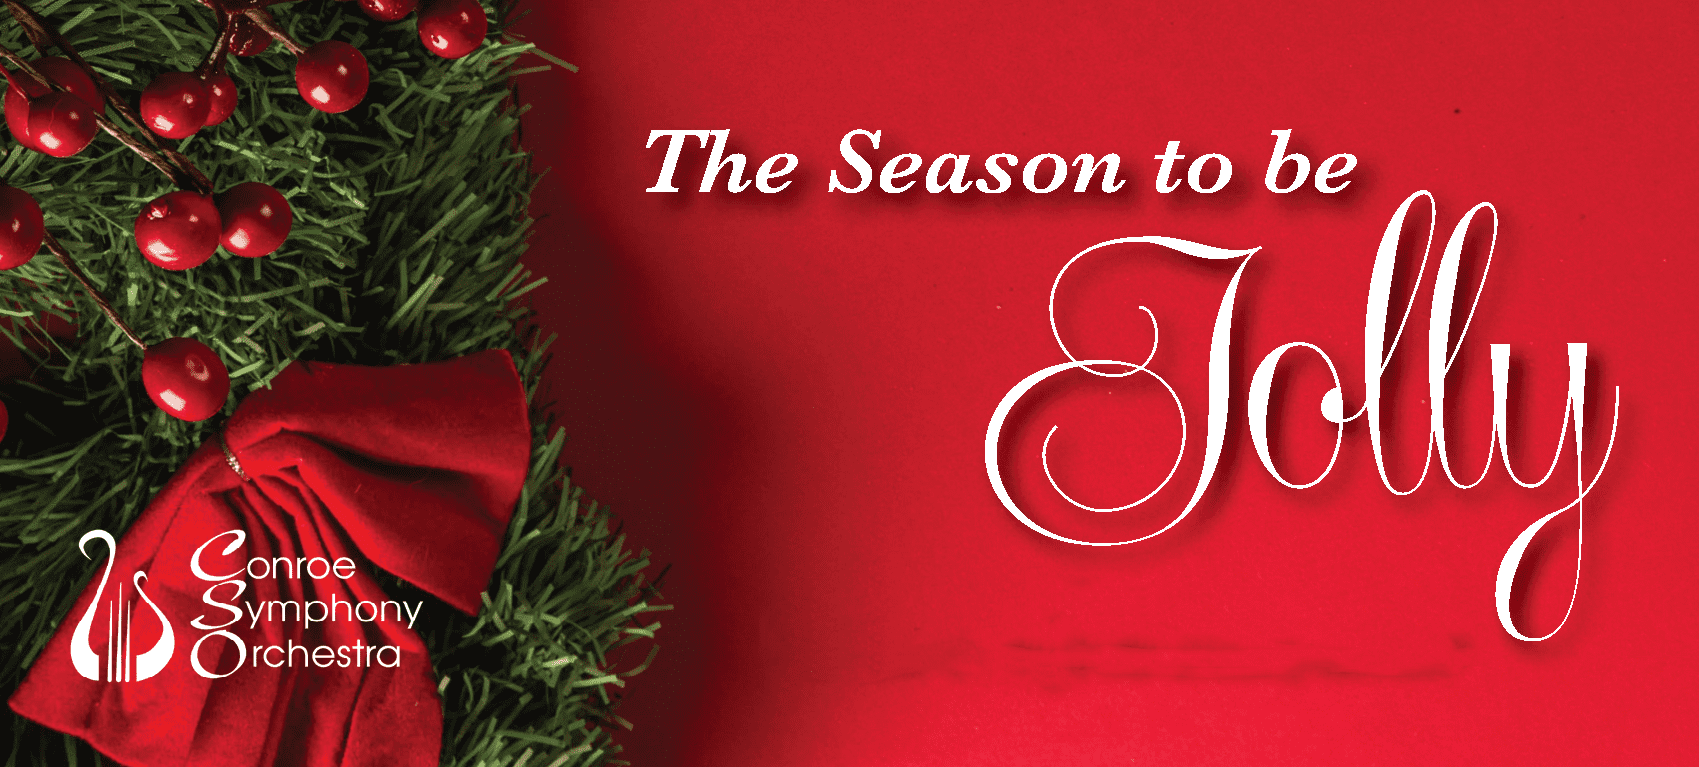 A Season to Be Jolly Card on a Red Color Background